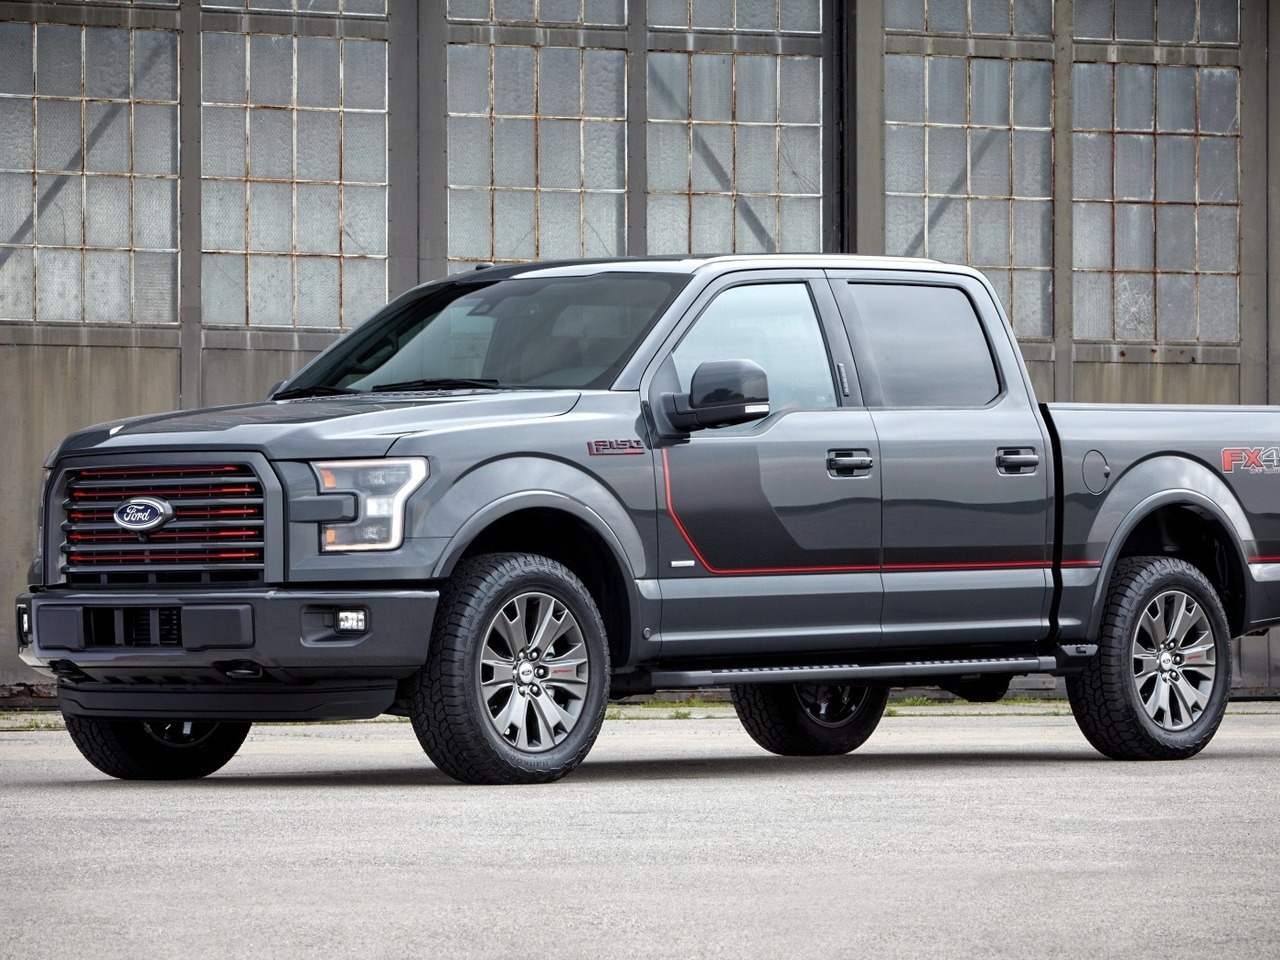 2015 Ford F150 Tremor for 1280 x 960 resolution